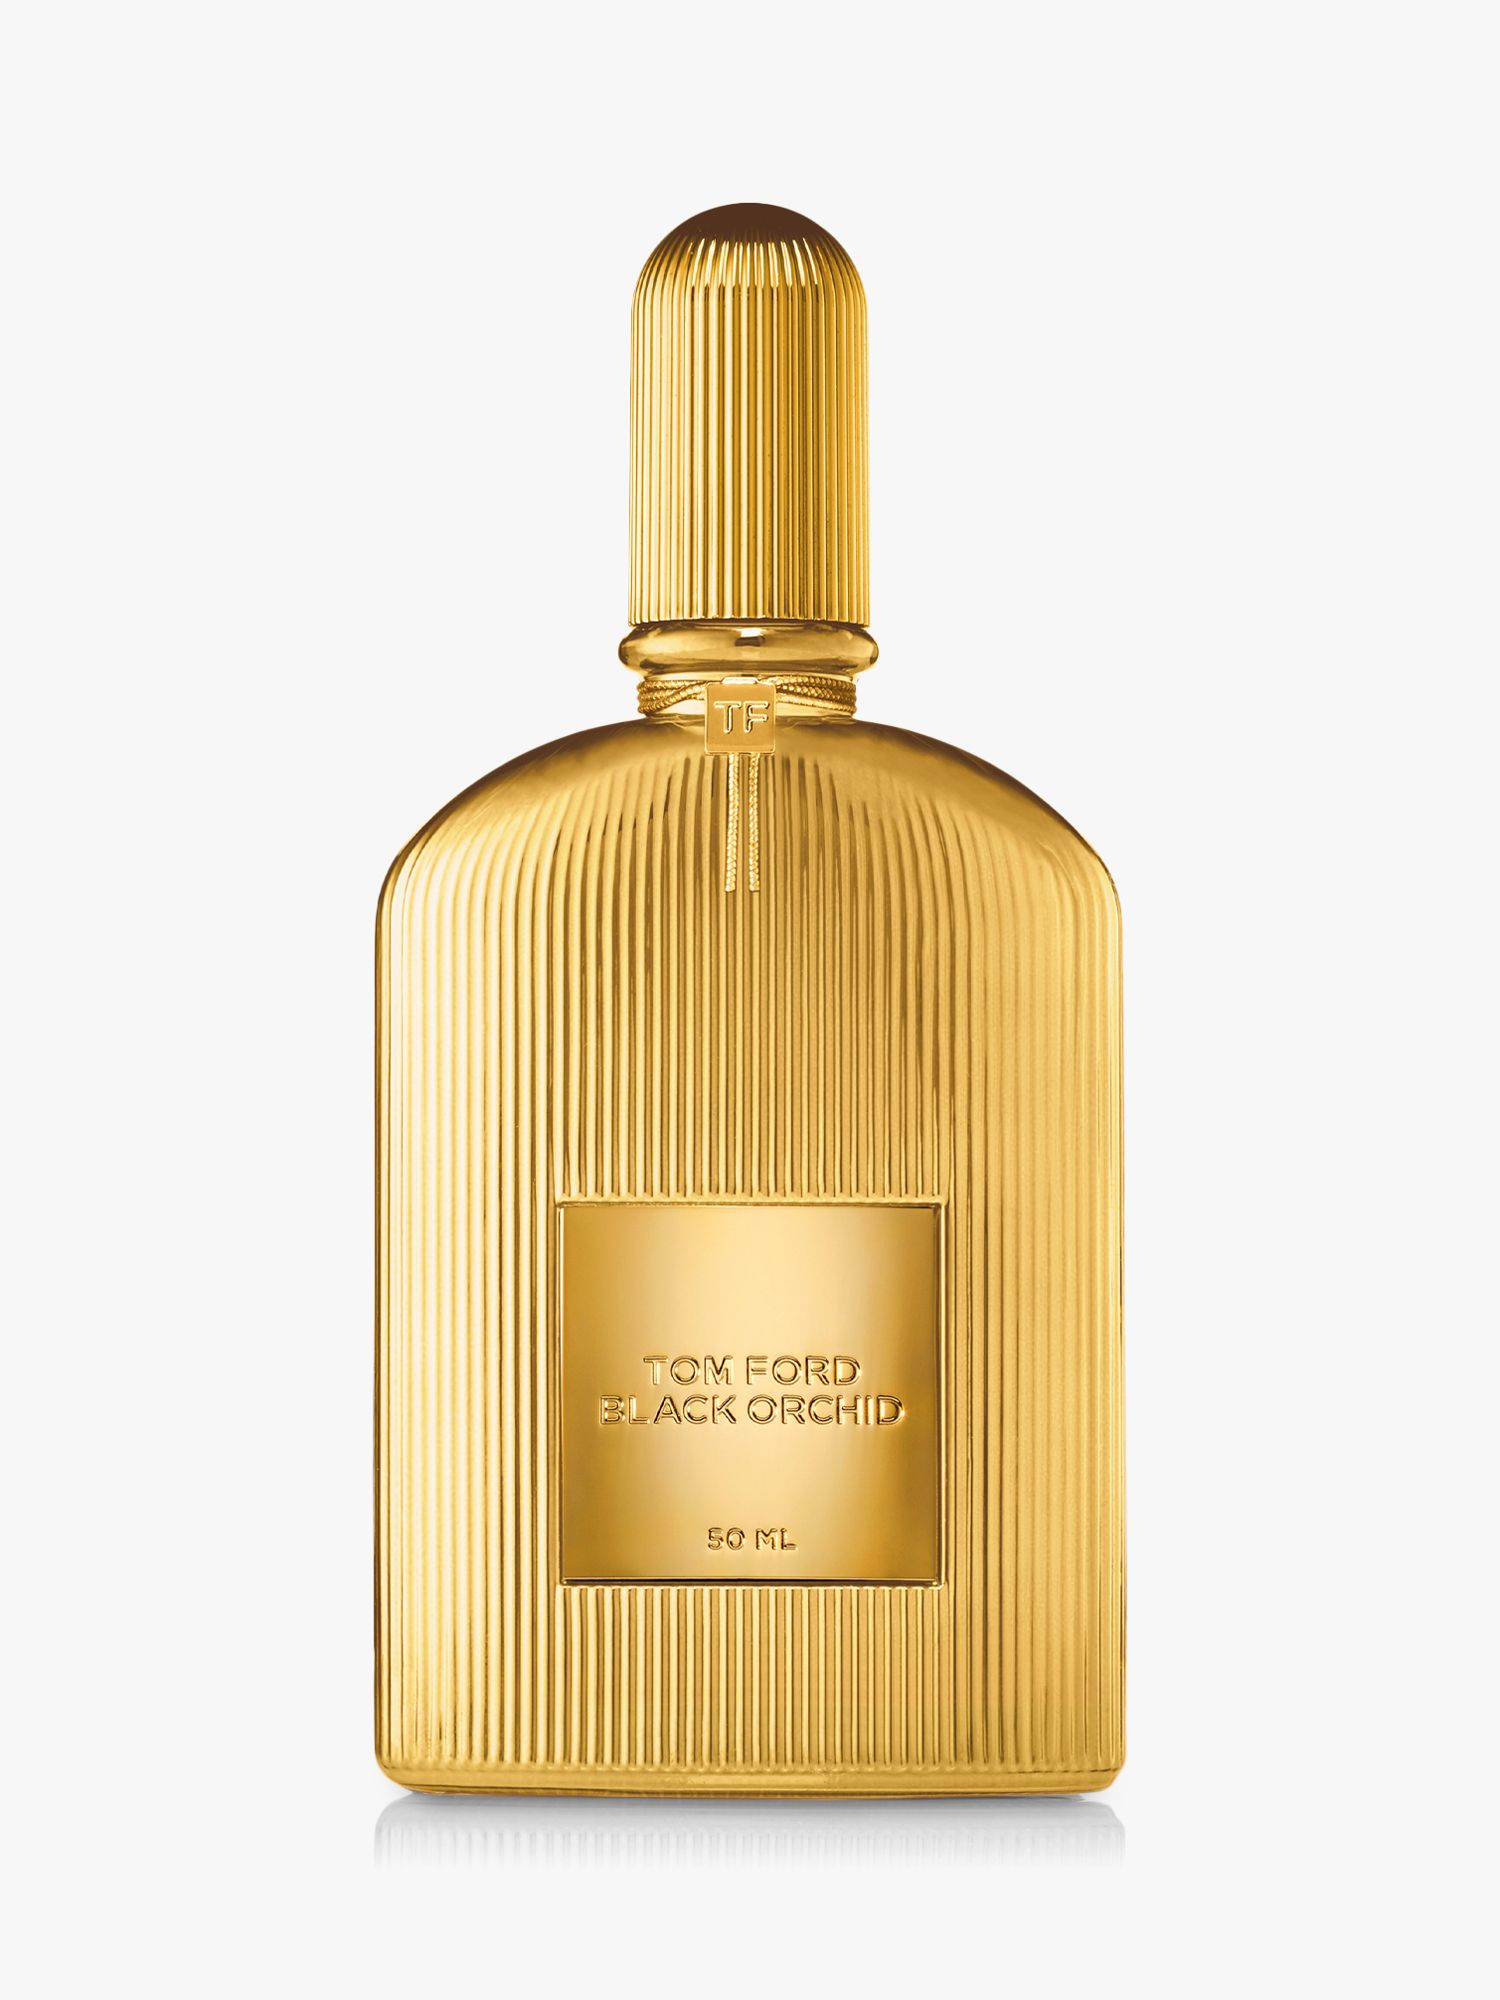 TOM FORD Black Orchid Parfum, 50ml at John Lewis & Partners